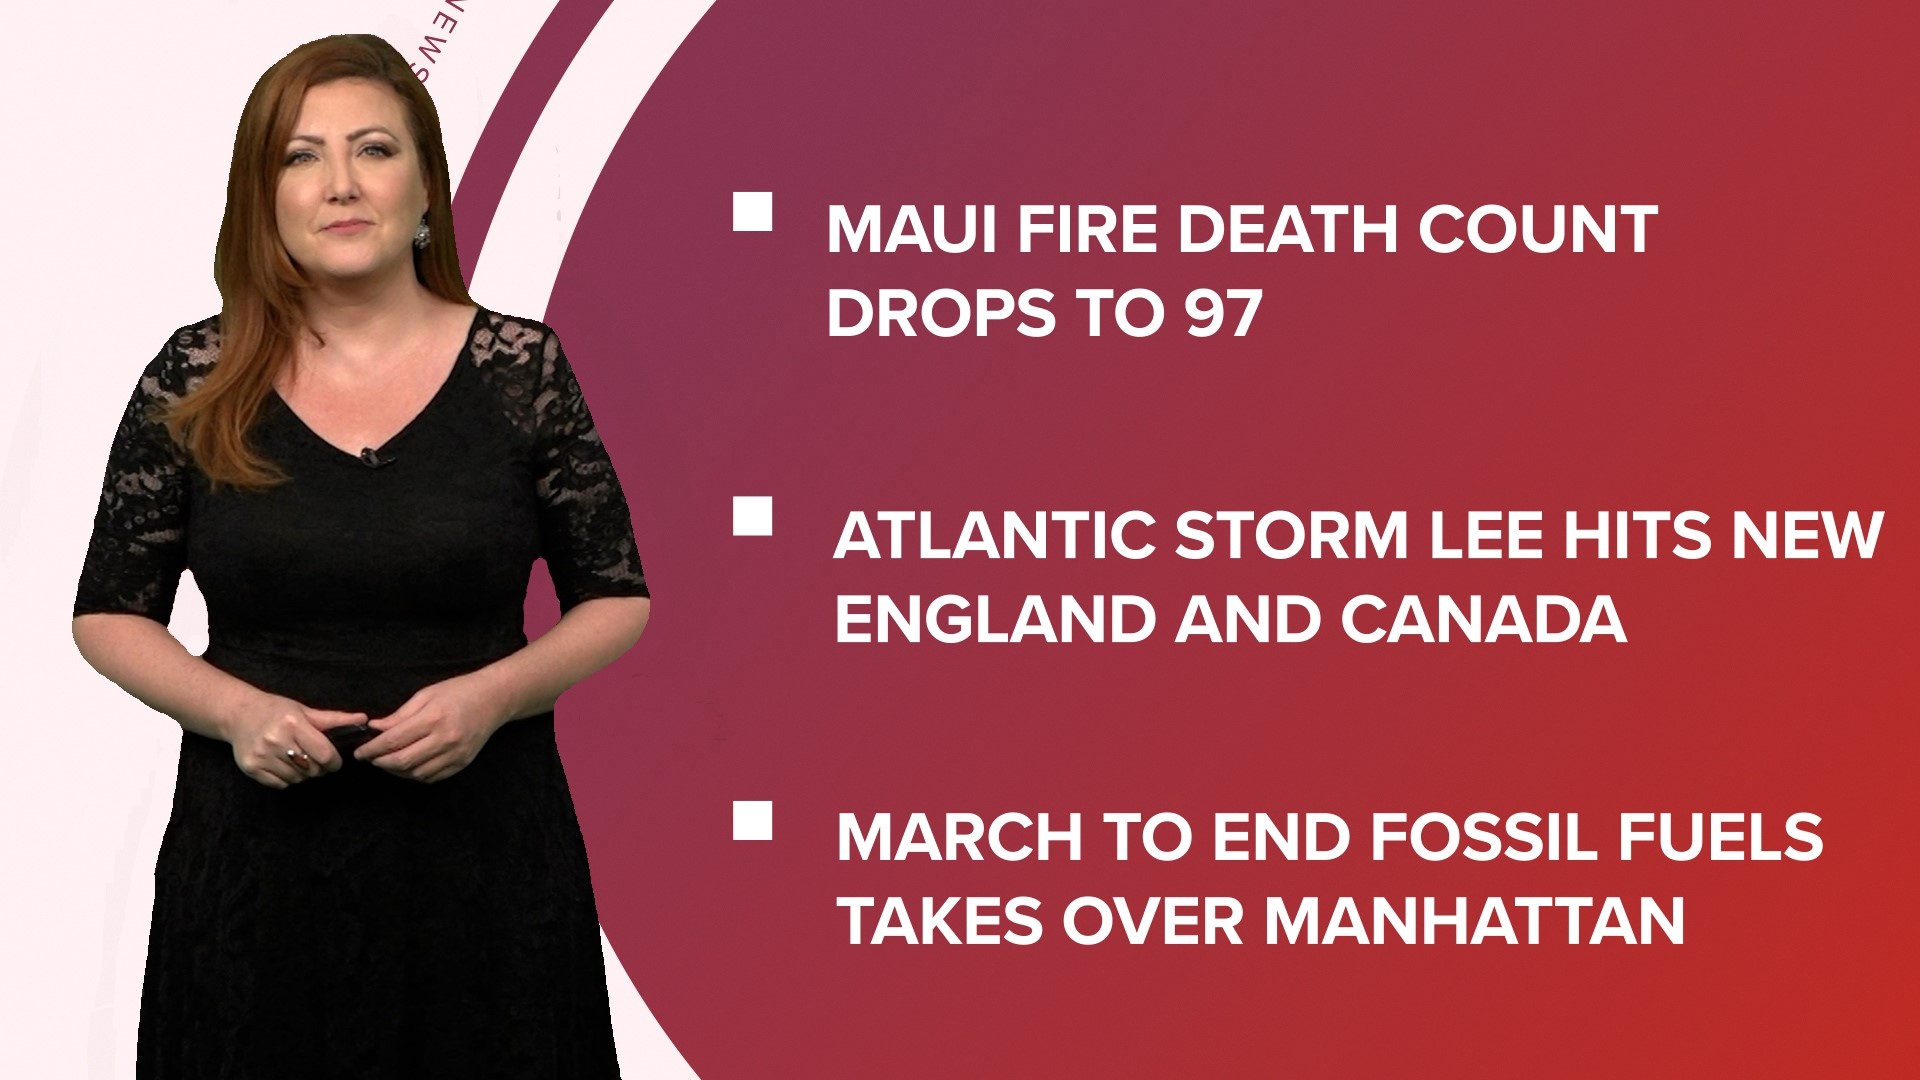 A look at what is happening in the news from a change in the Maui death toll to the end of the Texas AG's impeachment trial and Russell Brand faces allegations.